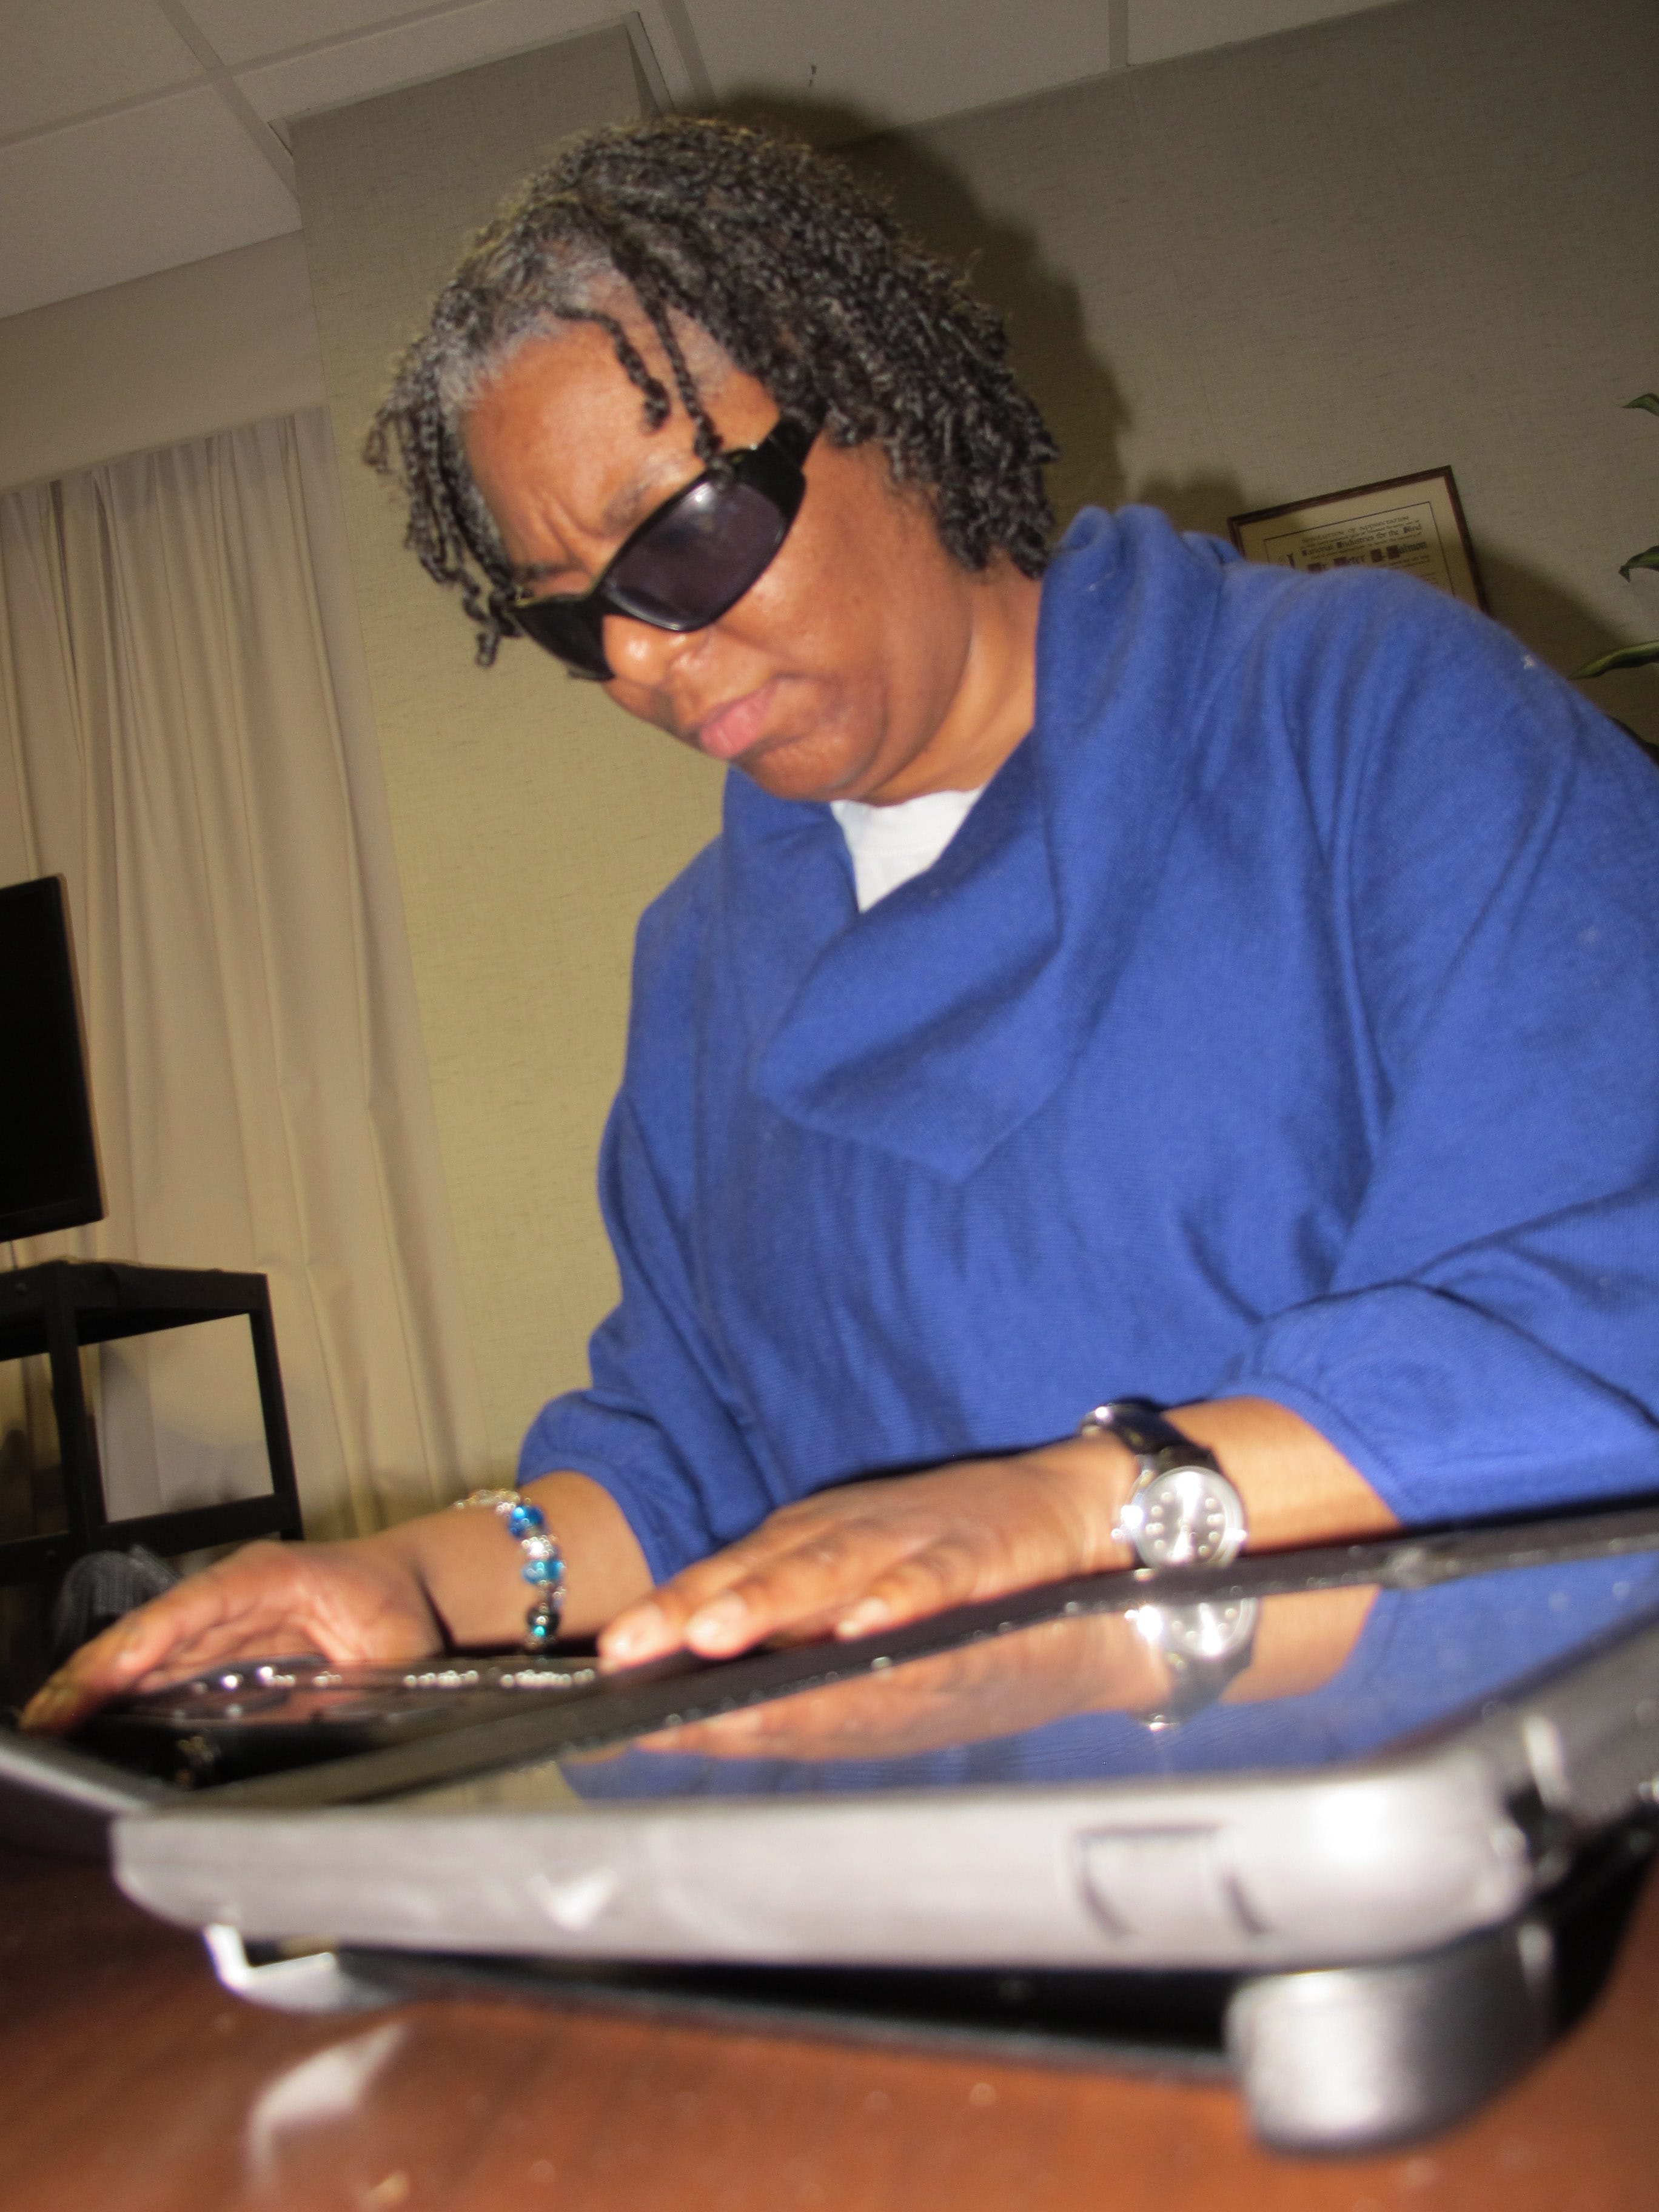 Tanisha Verdejo, a client at the Helen Keller National Center, demonstrates the use of a specially designed keyboard that helps blind clients access the Internet, in Sands Point, N.Y.